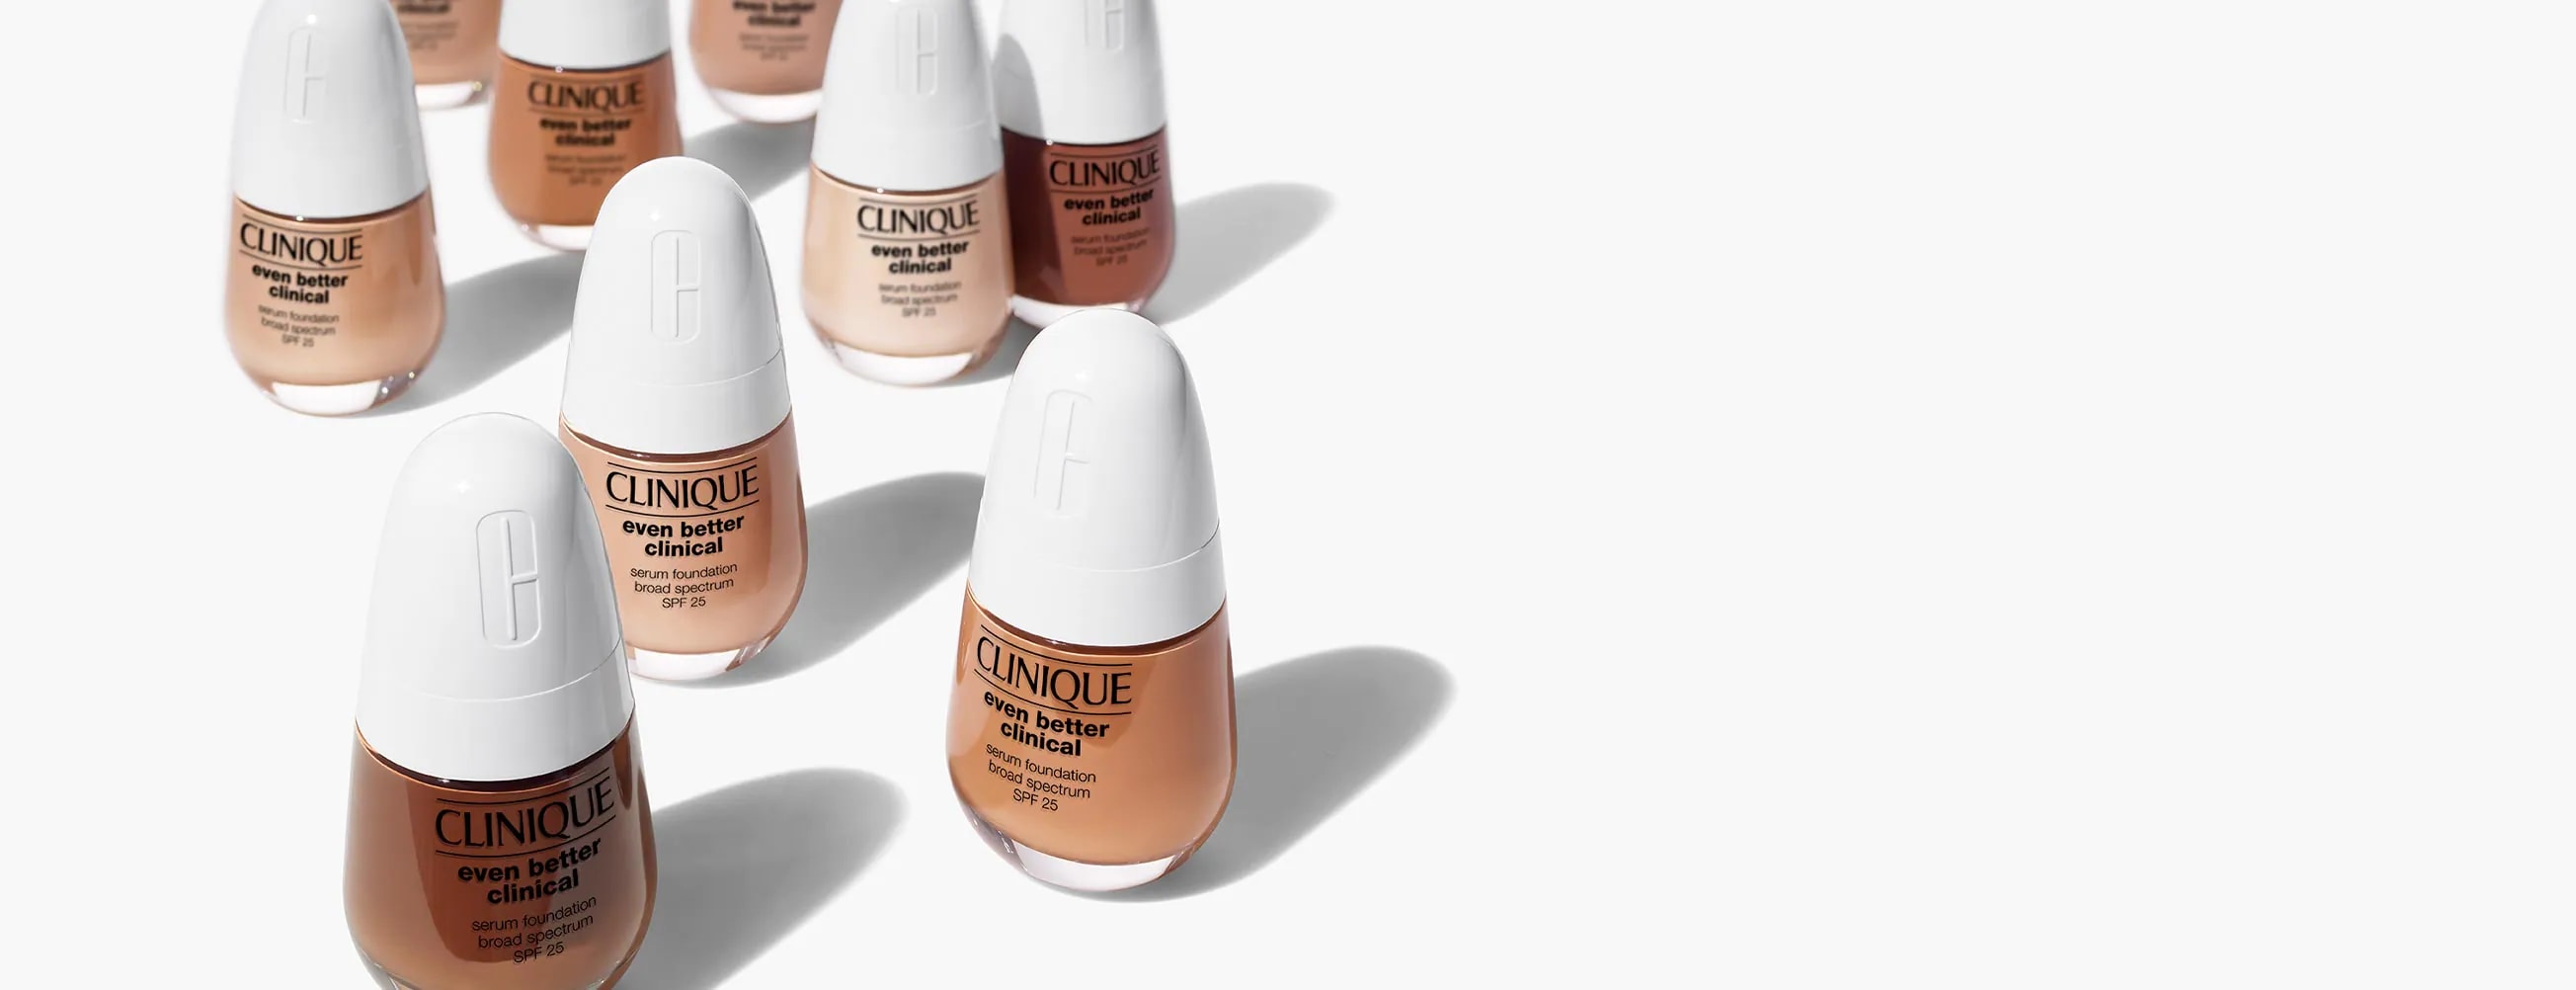 Meet your new favorite foundation